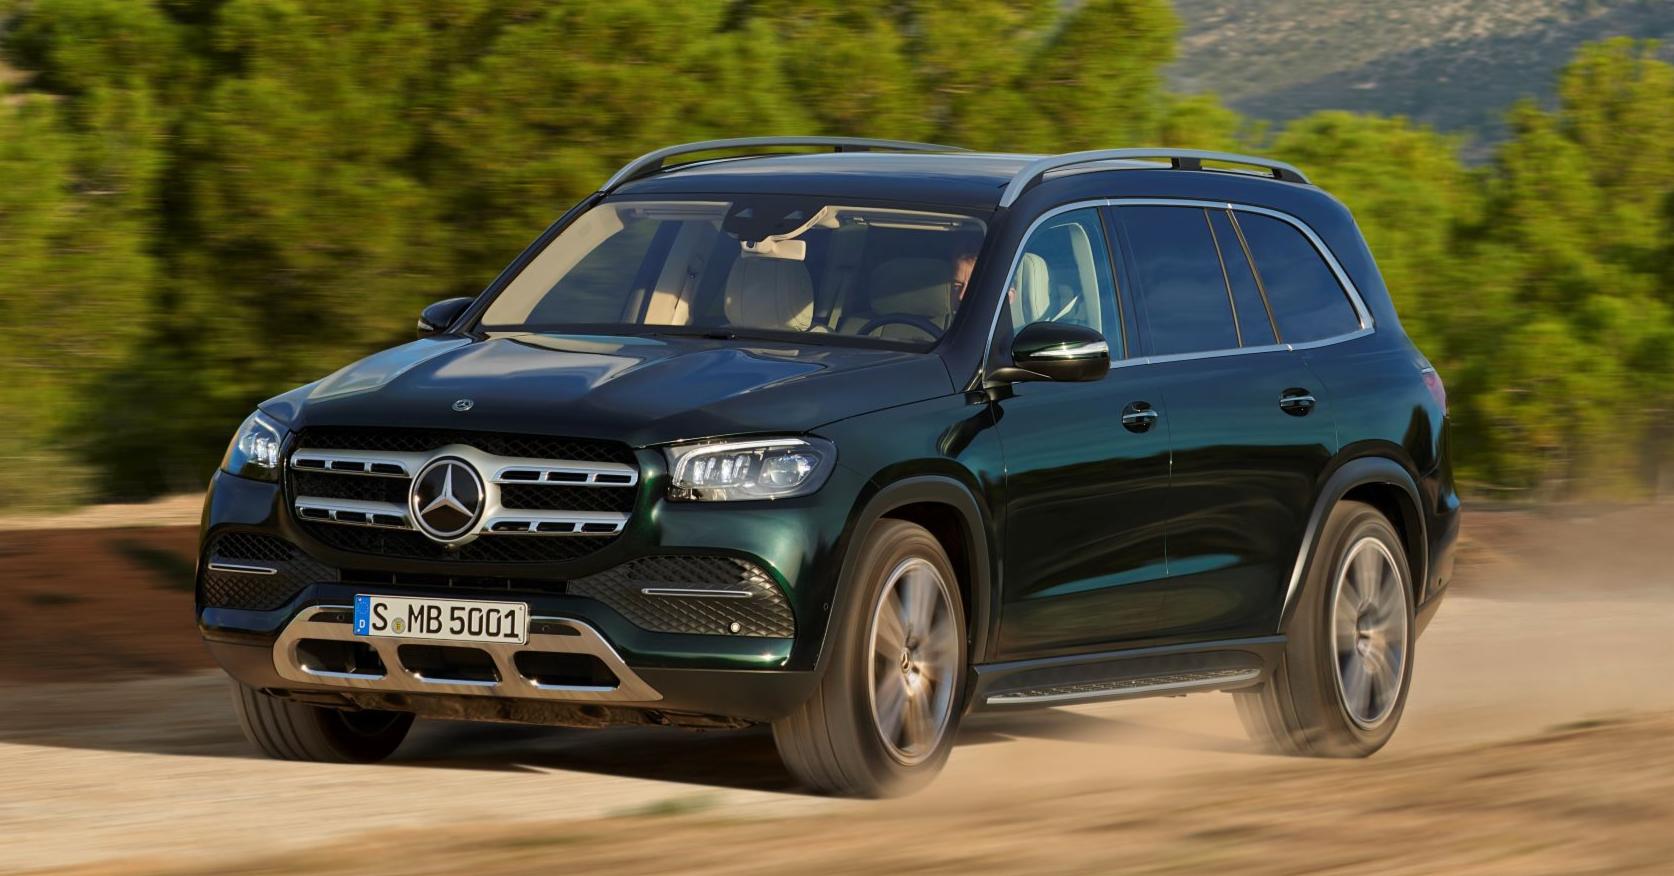 The Biggest and Most Luxurious Mercedes-Benz SUV Just Made Its